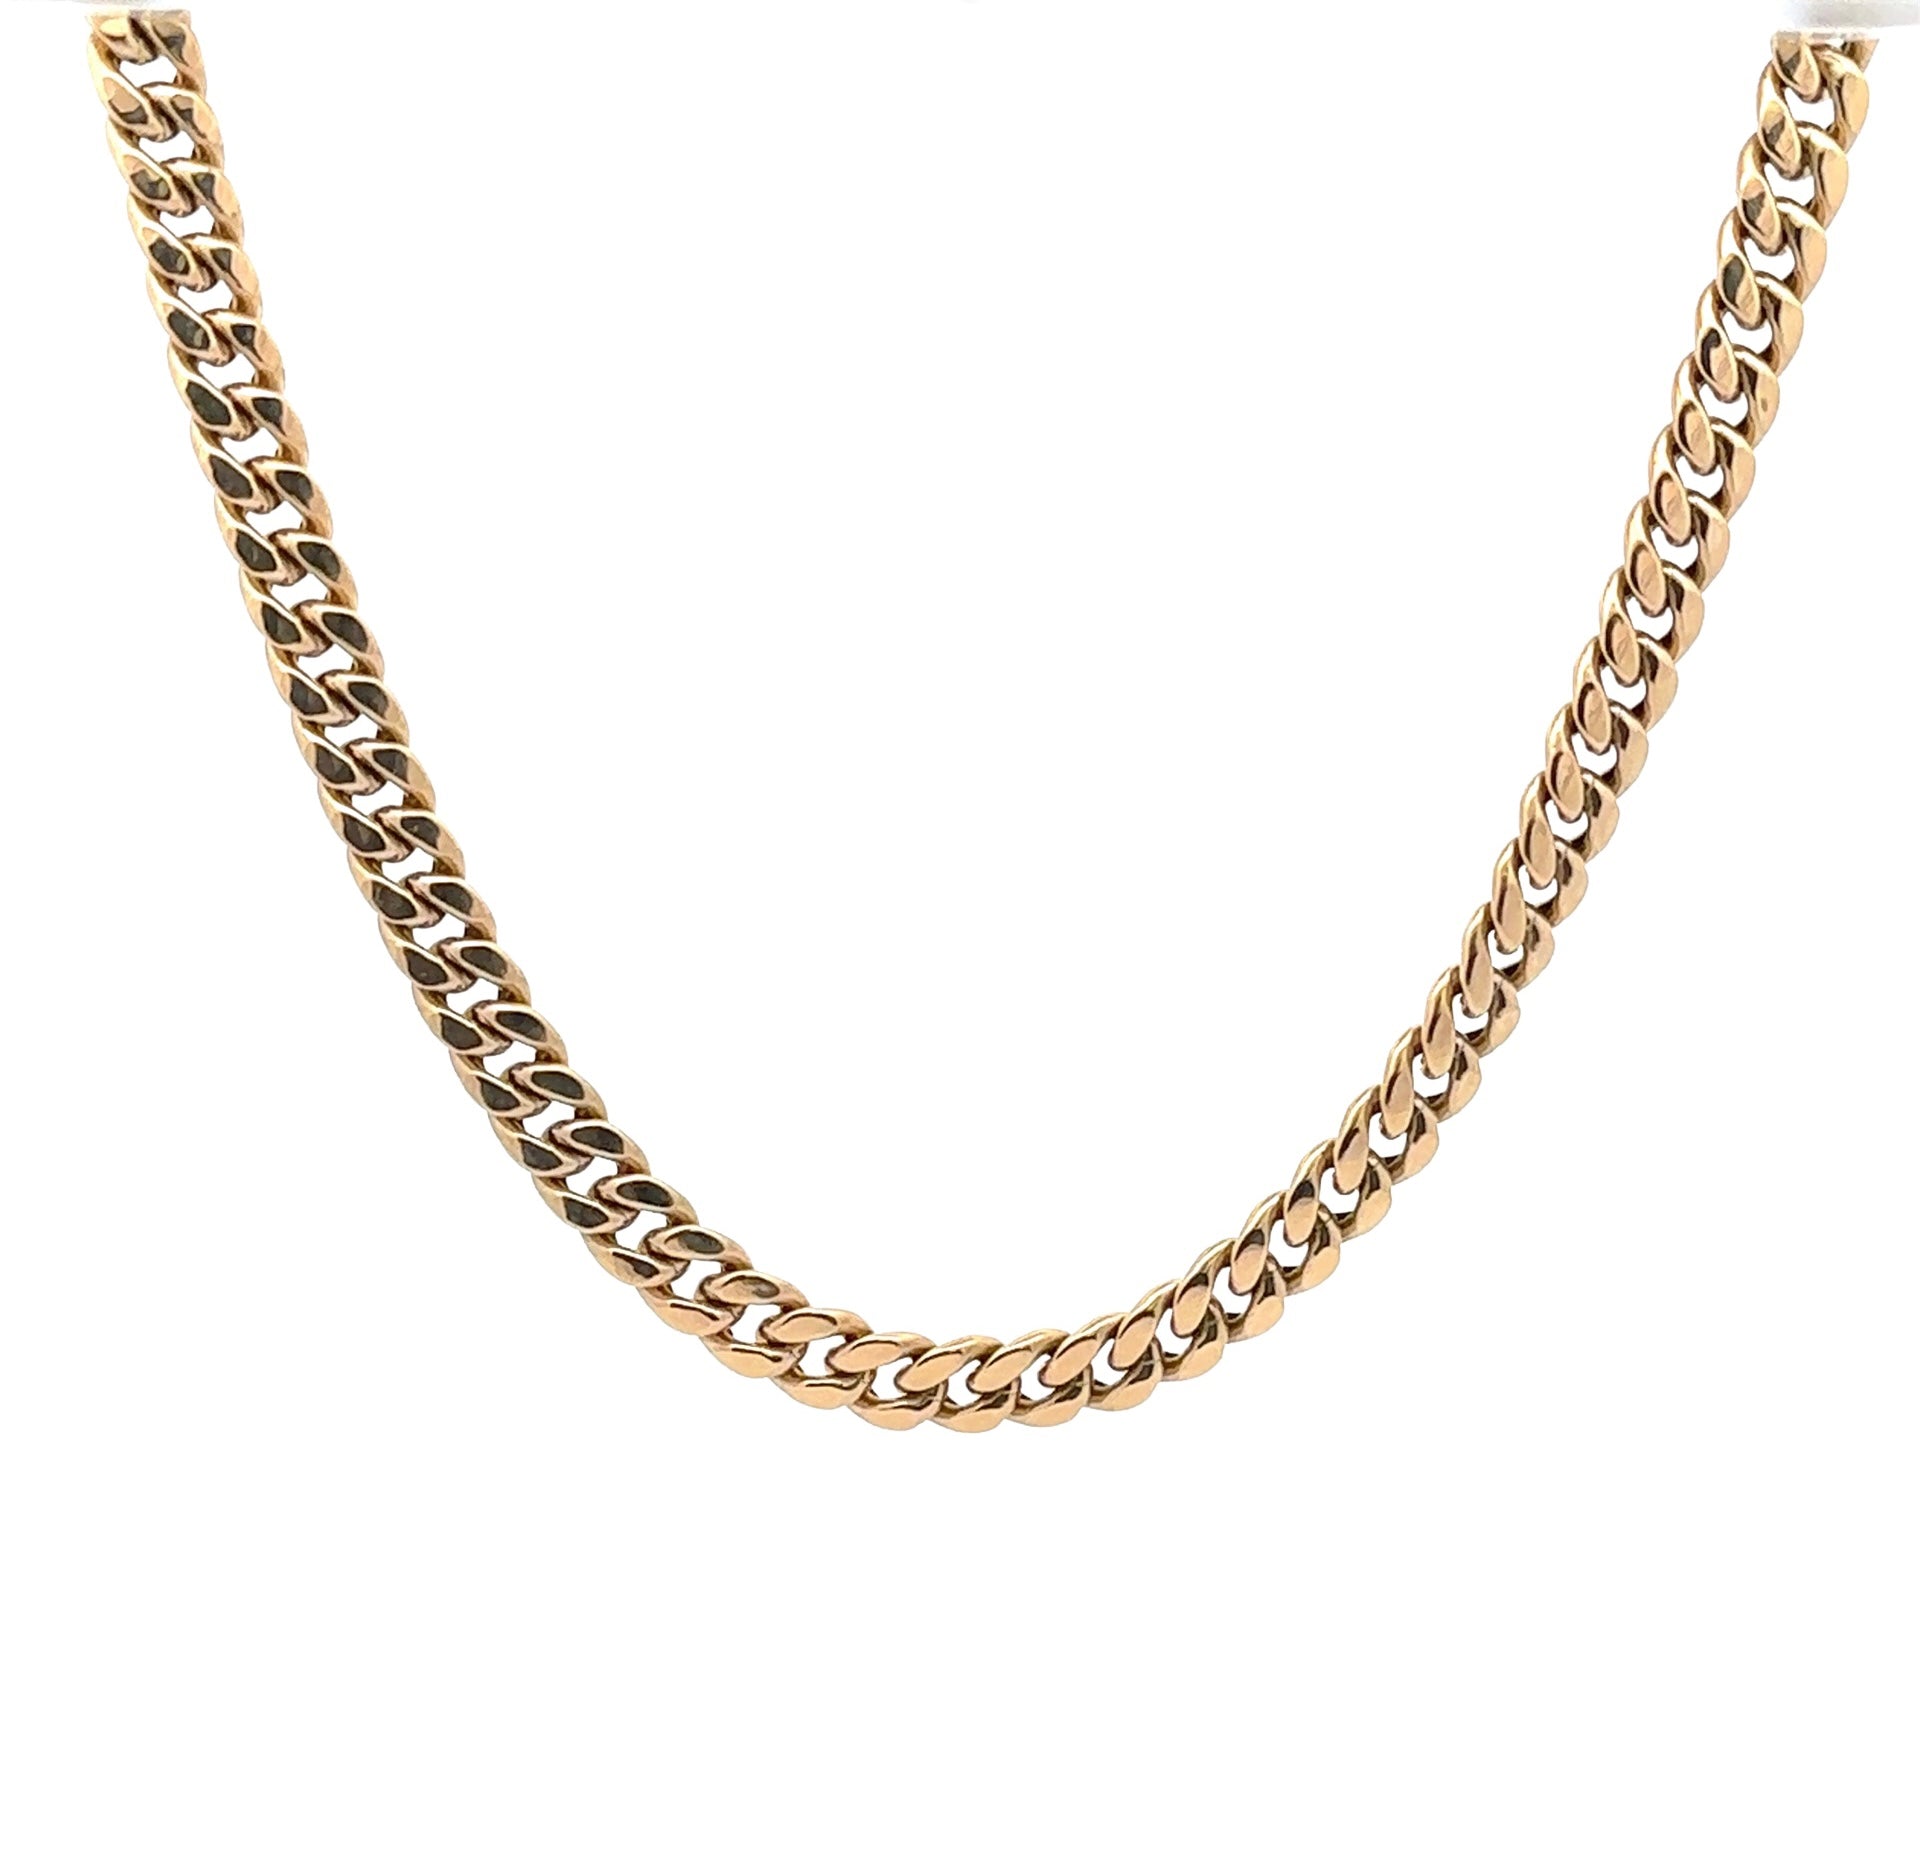 10K Yellow Gold Link Chain